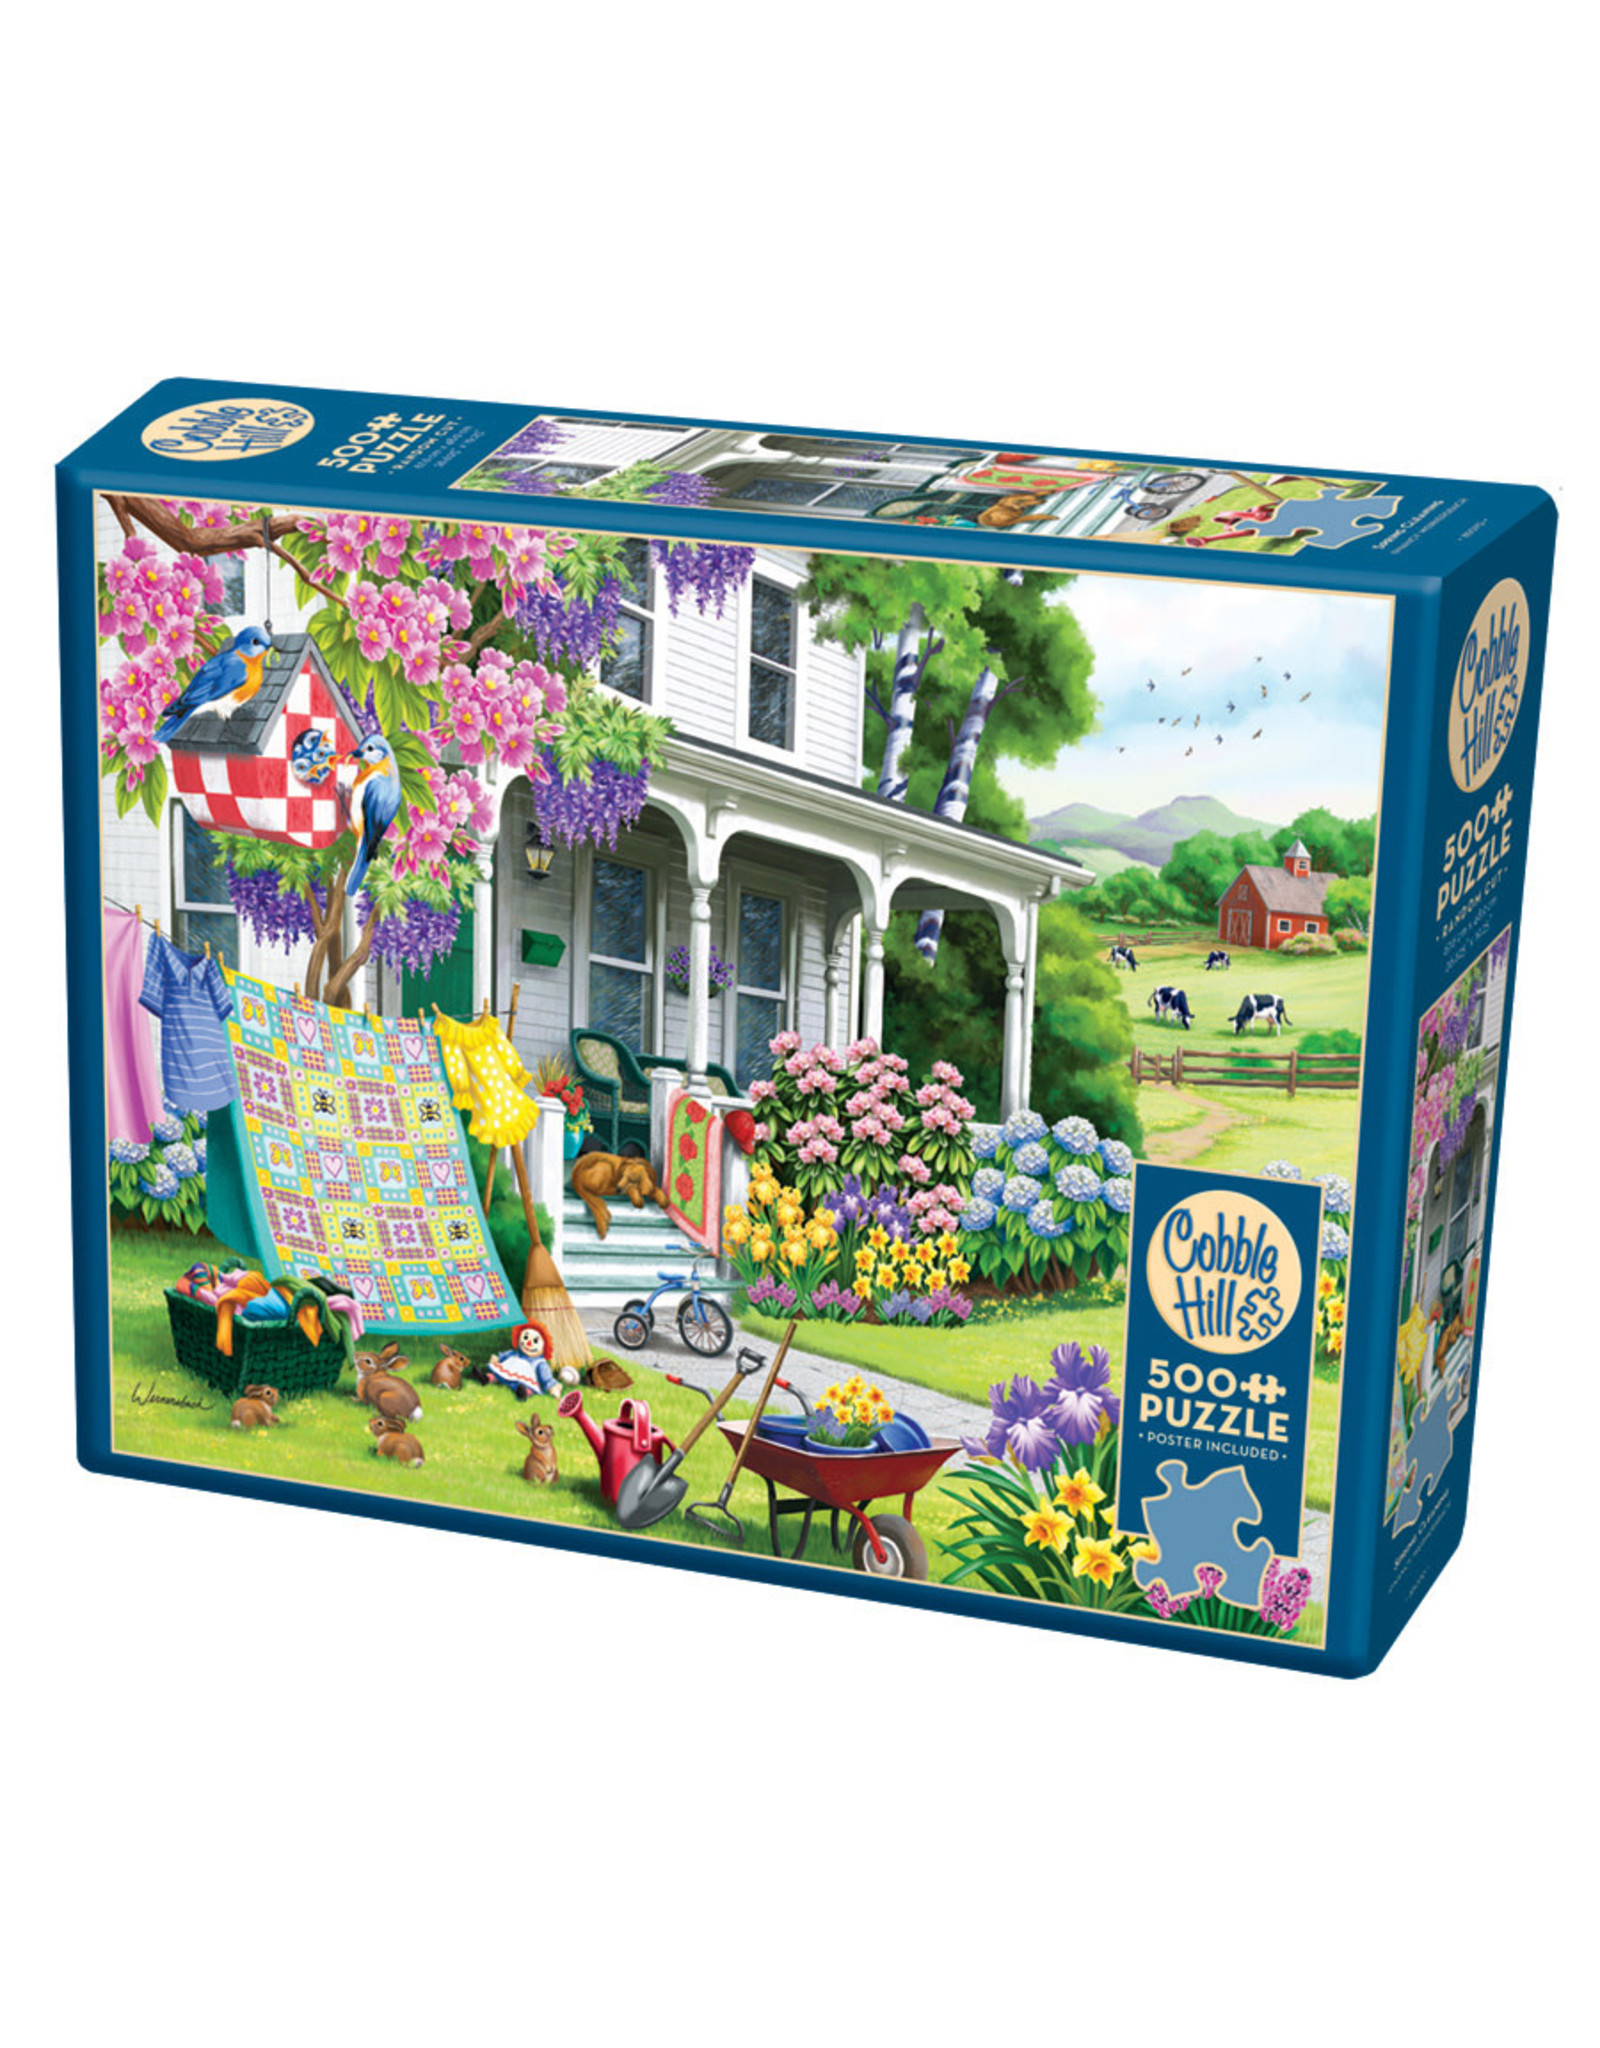 Cobble Hill Spring Cleaning 500 pc